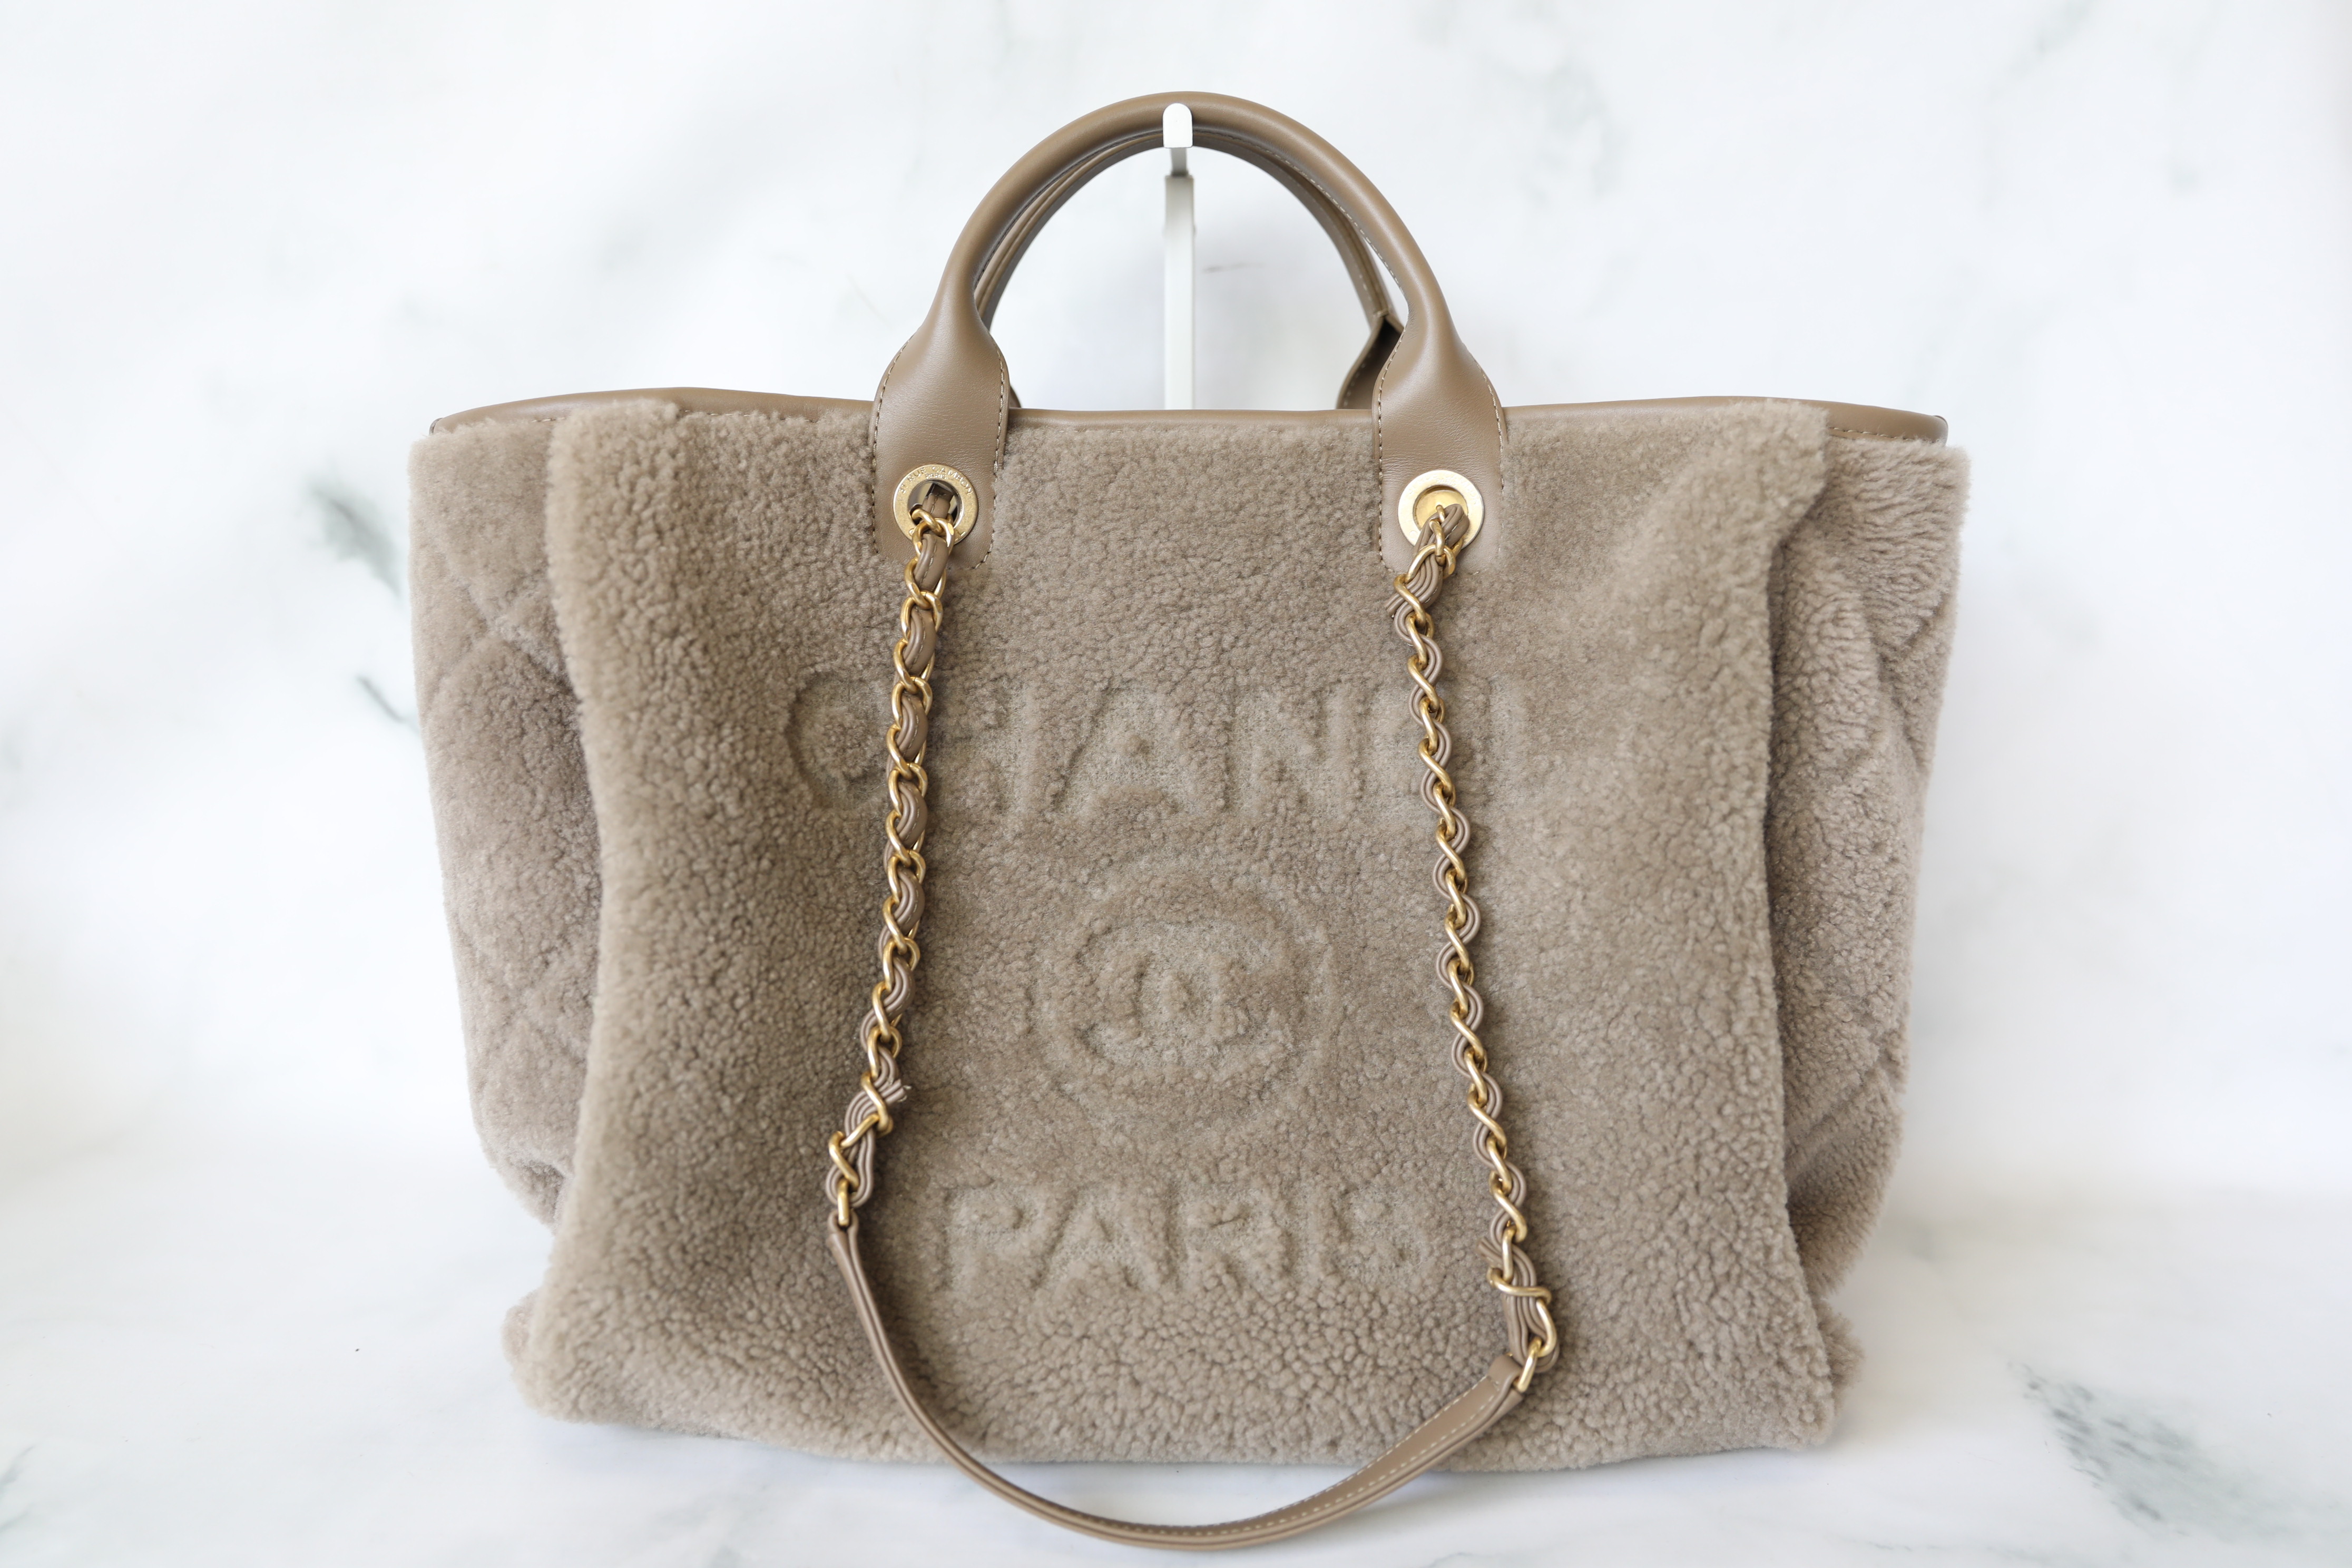 Chanel Deauville Large, Beige and Tan Striped Canvas with Gold Hardware,  Preowned No Dustbag WA001